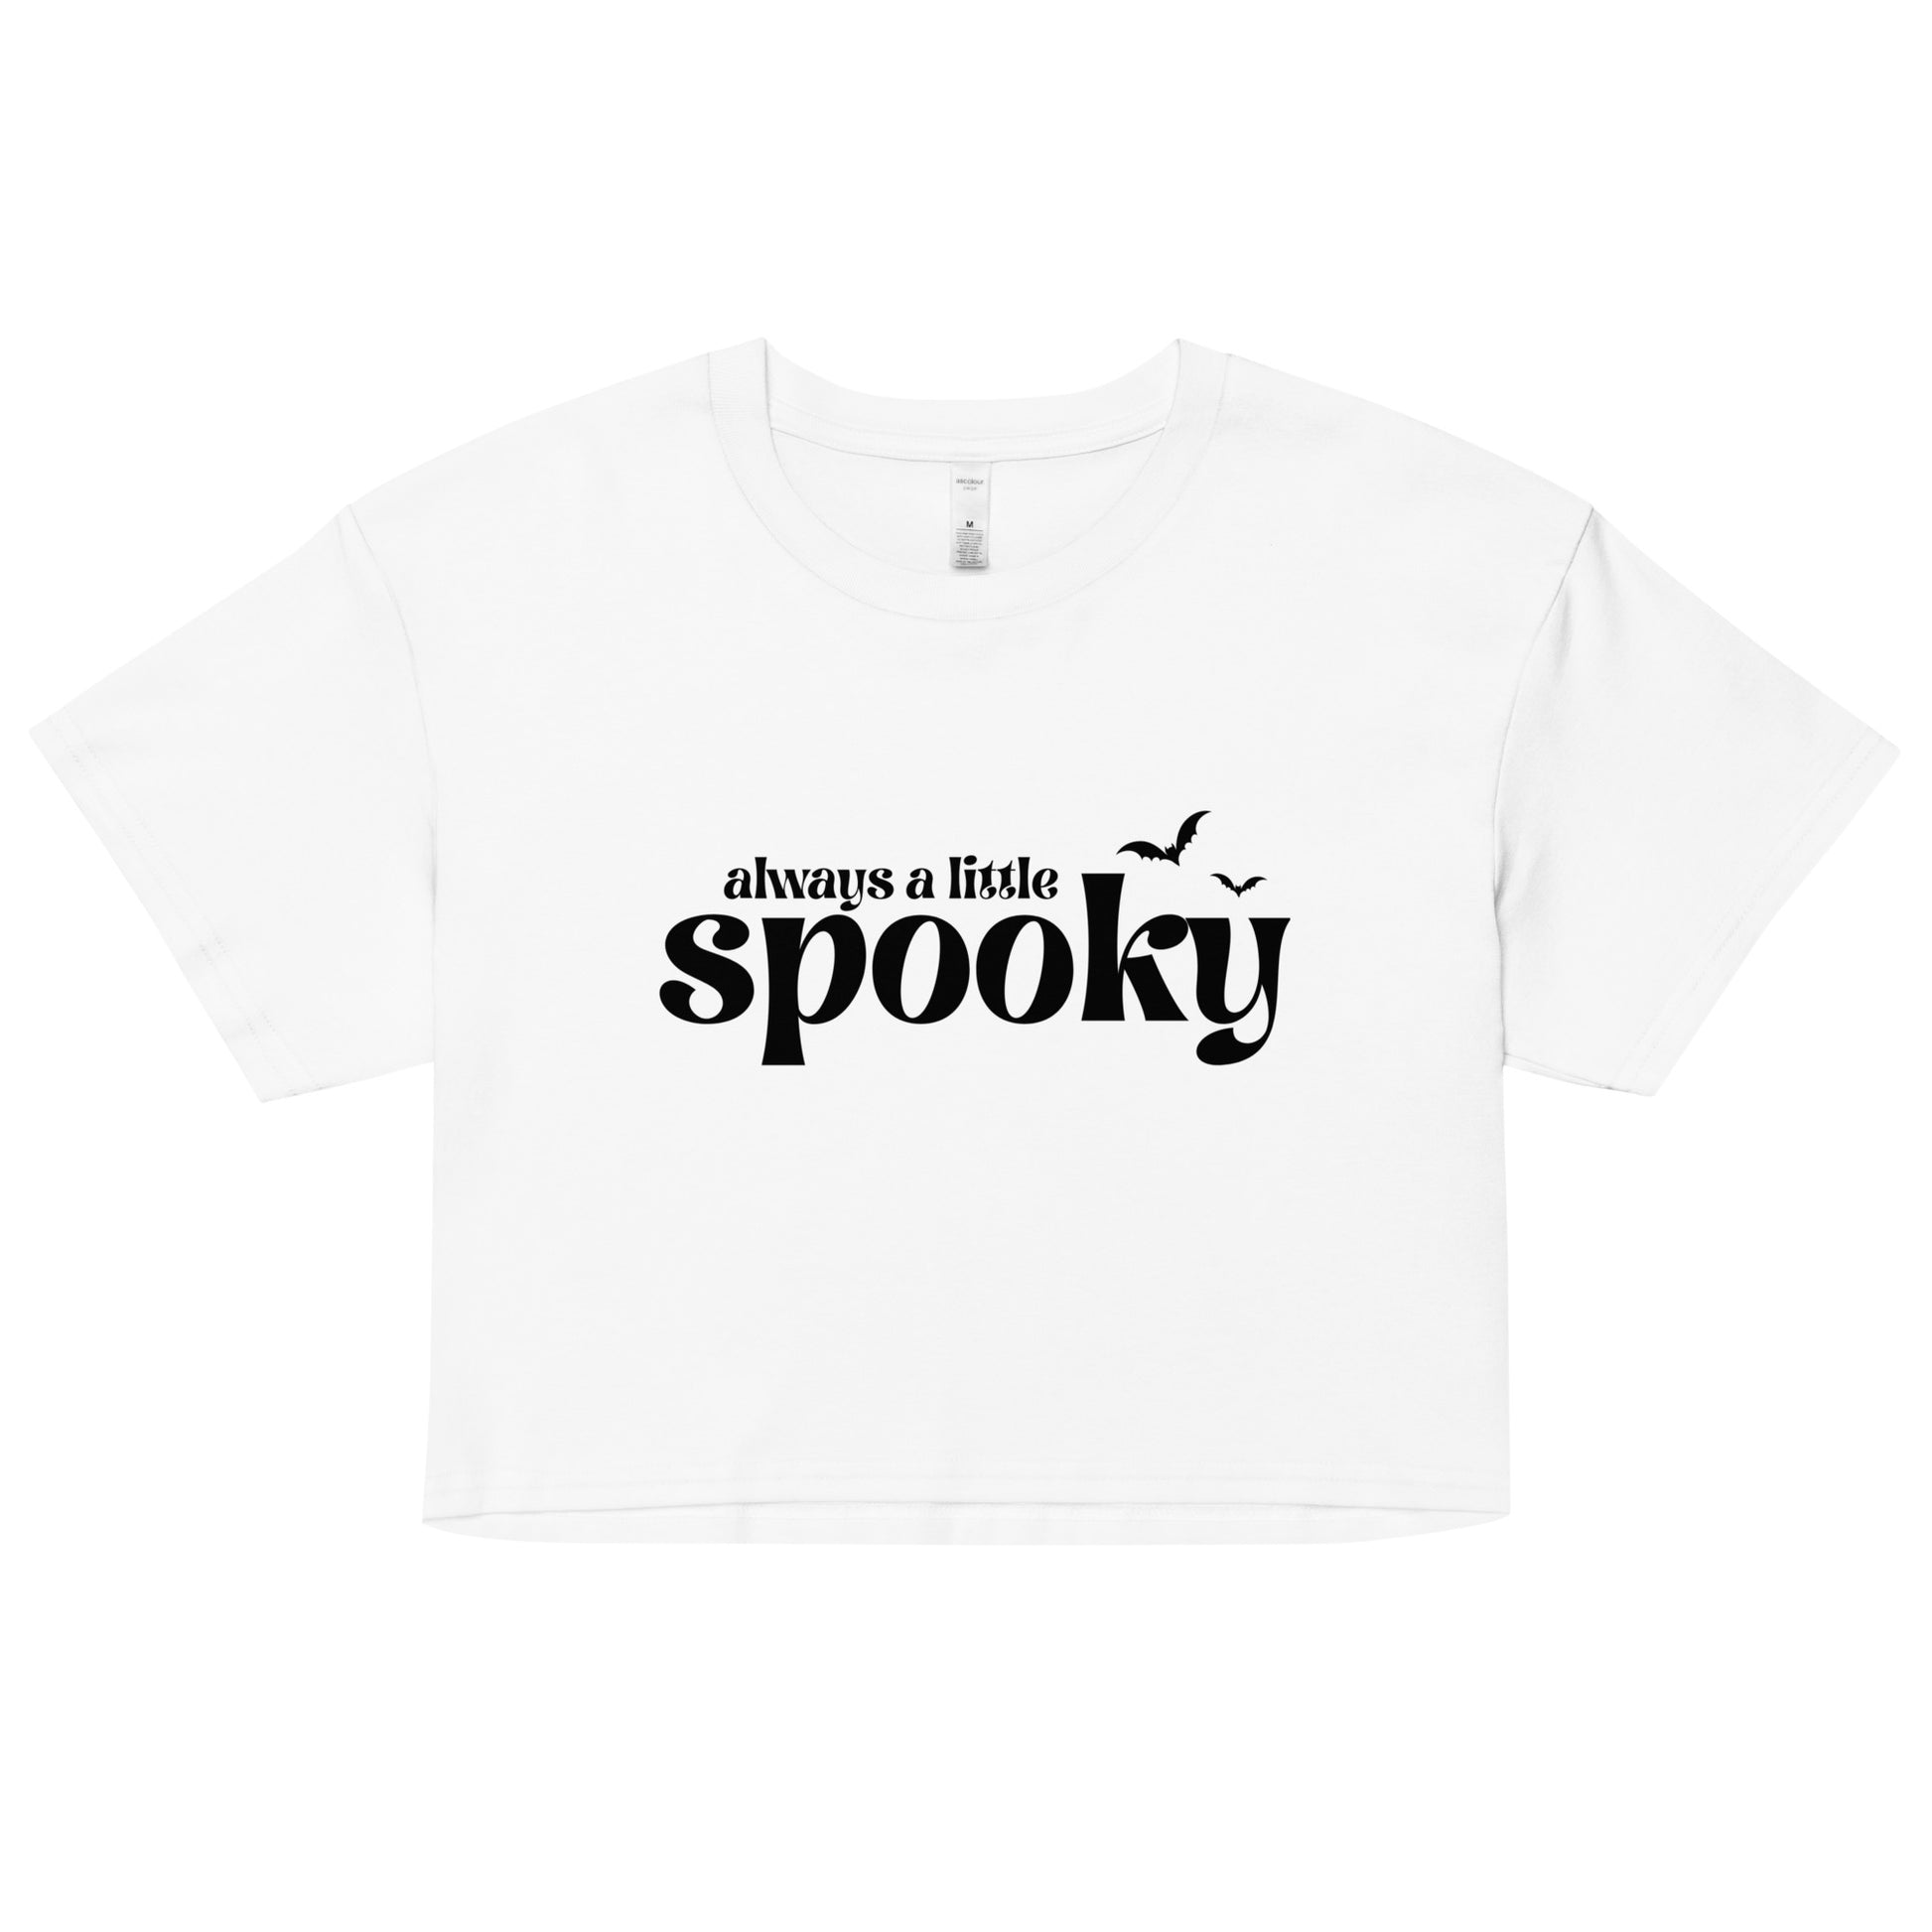 A white, cropped t-shirt that says "always a little spooky" in a trendy black font